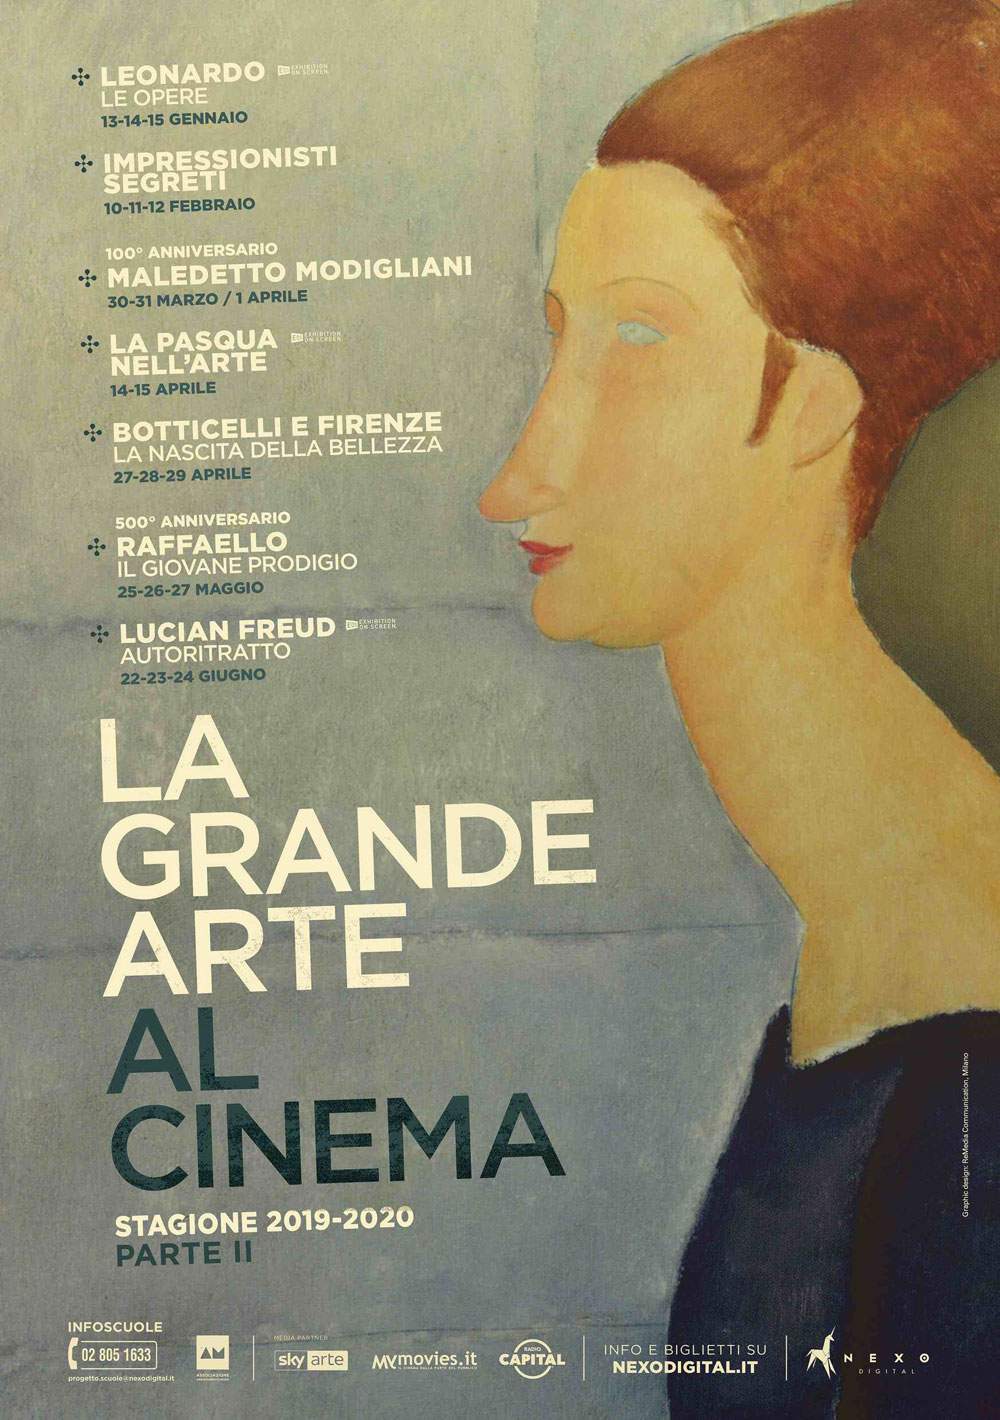 Presented the 2020 season of The Great Art at the Movies: from Leonardo to the Impressionists, Botticelli to Raphael to Lucian Freud